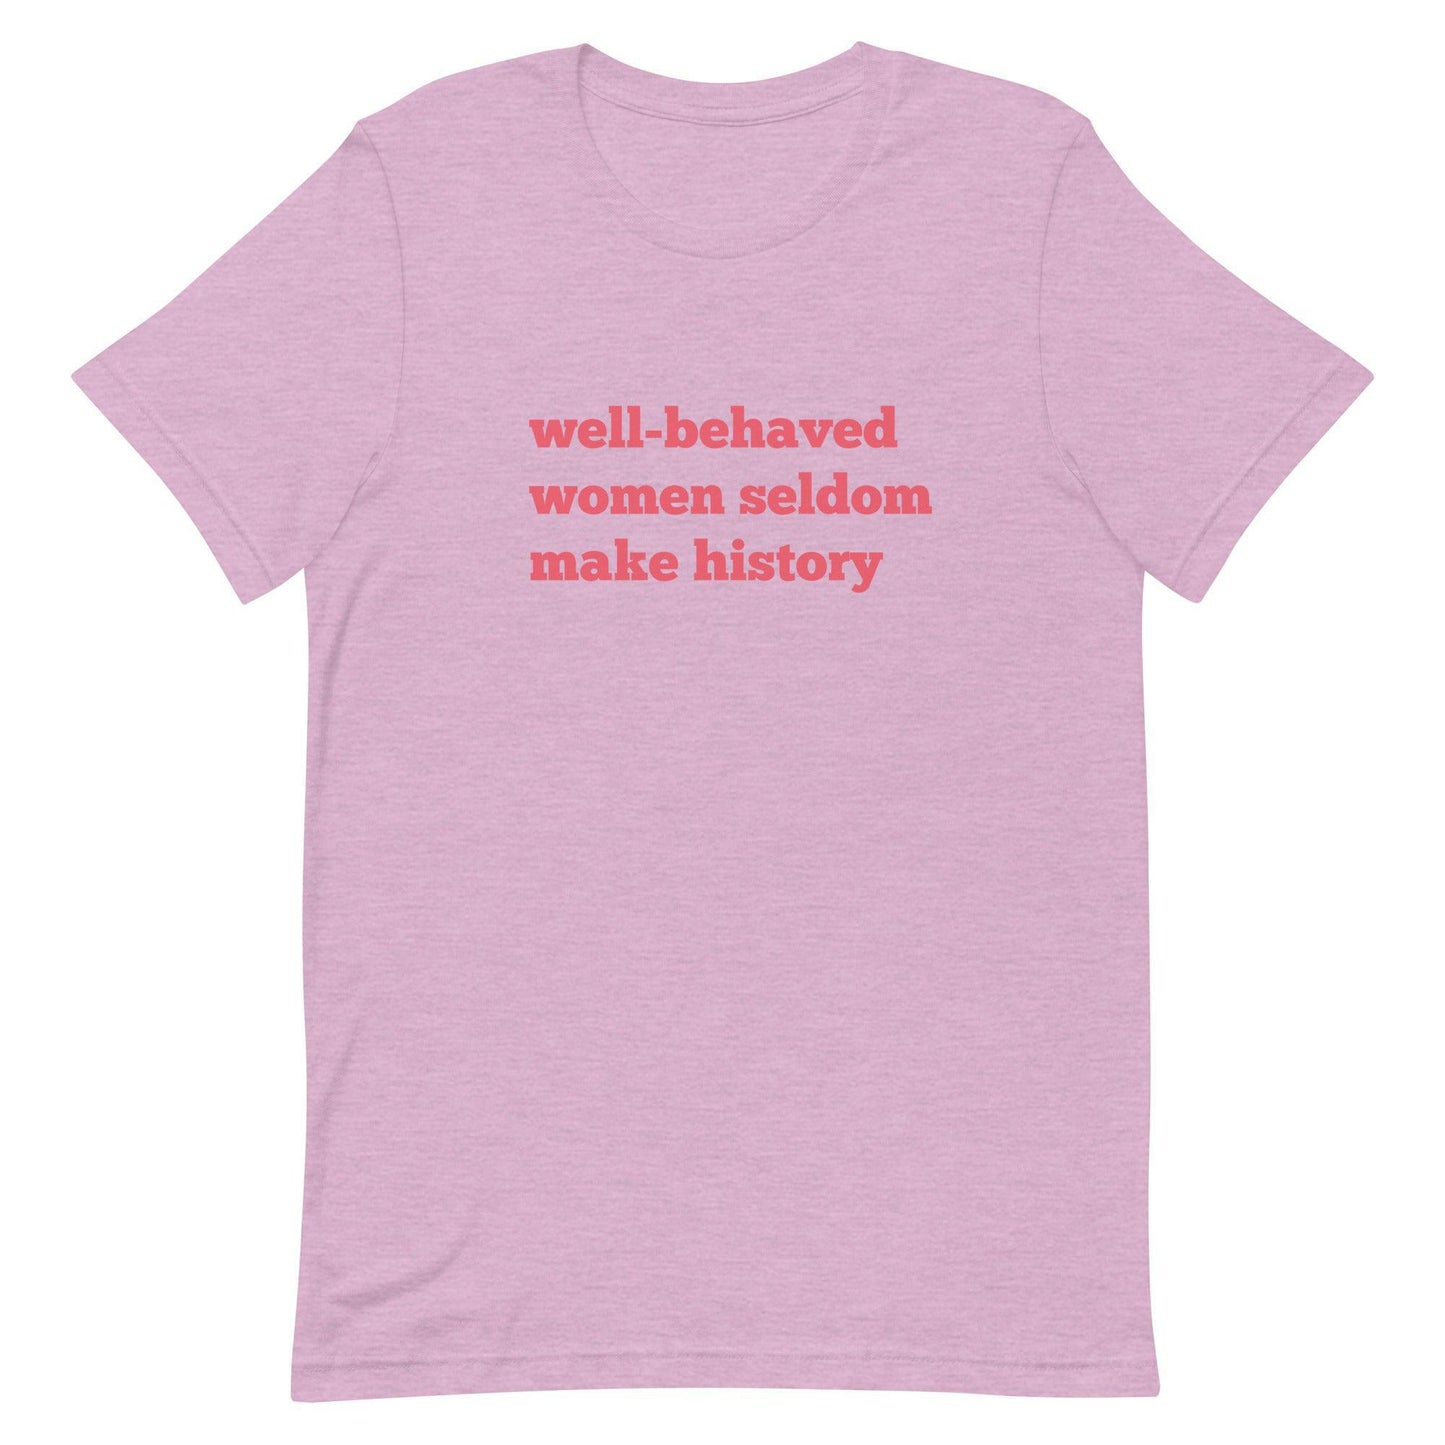 Load image into Gallery viewer, Well-Behaved Women Seldom Make History Shirt-Tees-Crimson and Clover Studio
